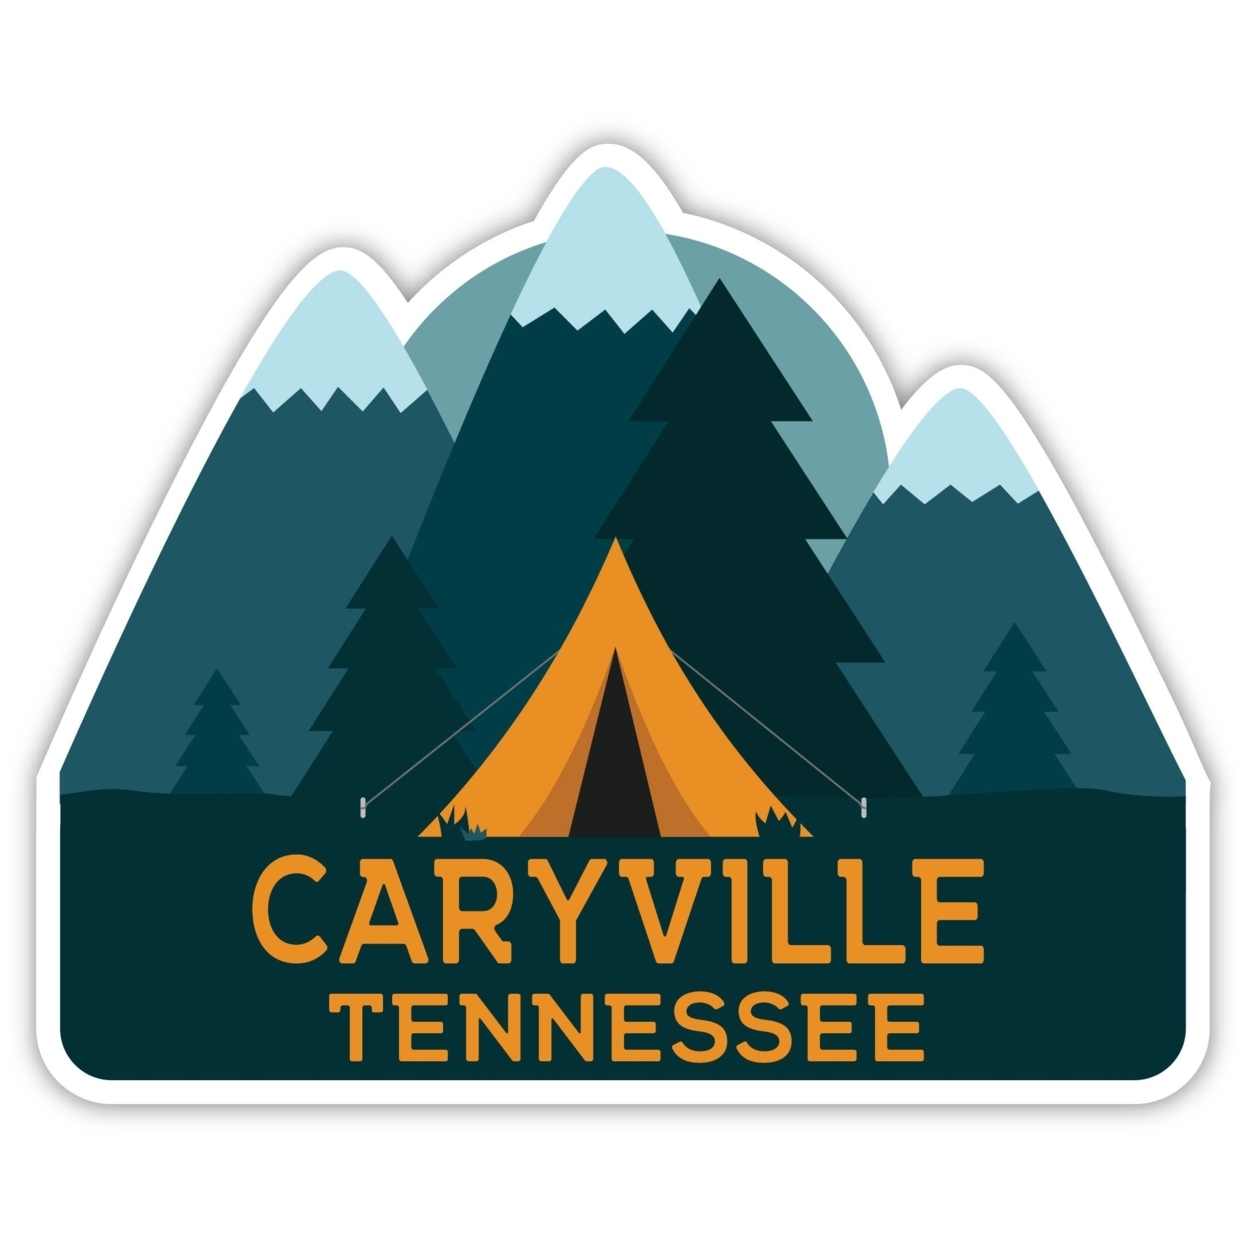 Caryville Tennessee Souvenir Decorative Stickers (Choose Theme And Size) - Single Unit, 2-Inch, Bear